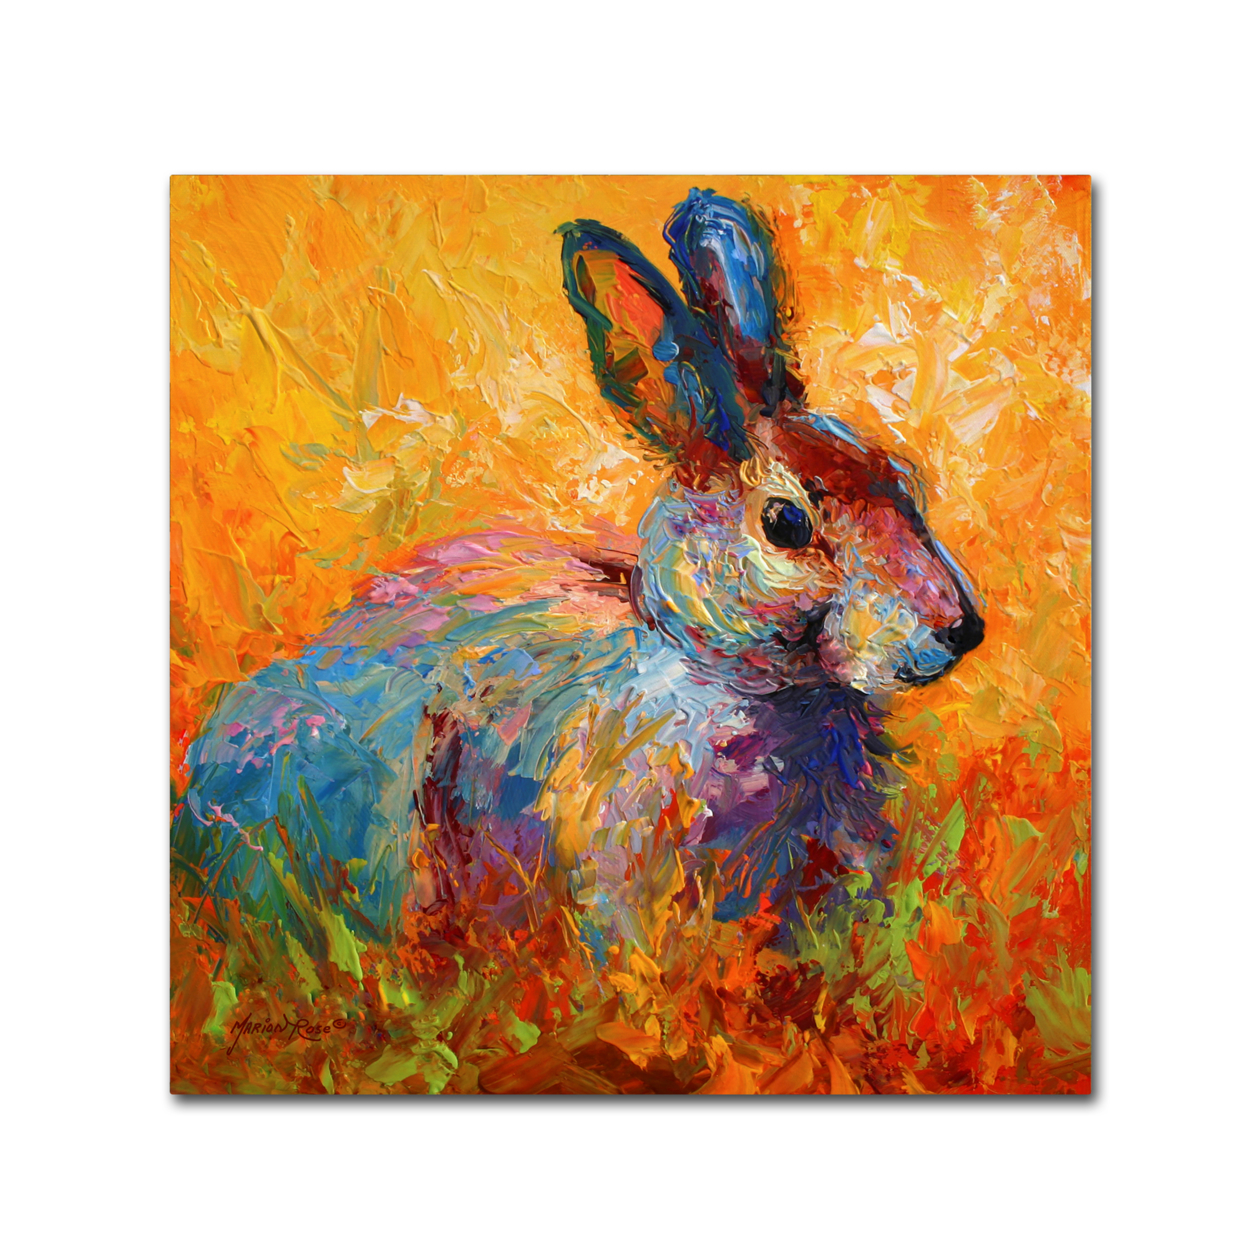 Marion Rose 'Bunny IV' Ready To Hang Canvas Art 18 X 18 Inches Made In USA